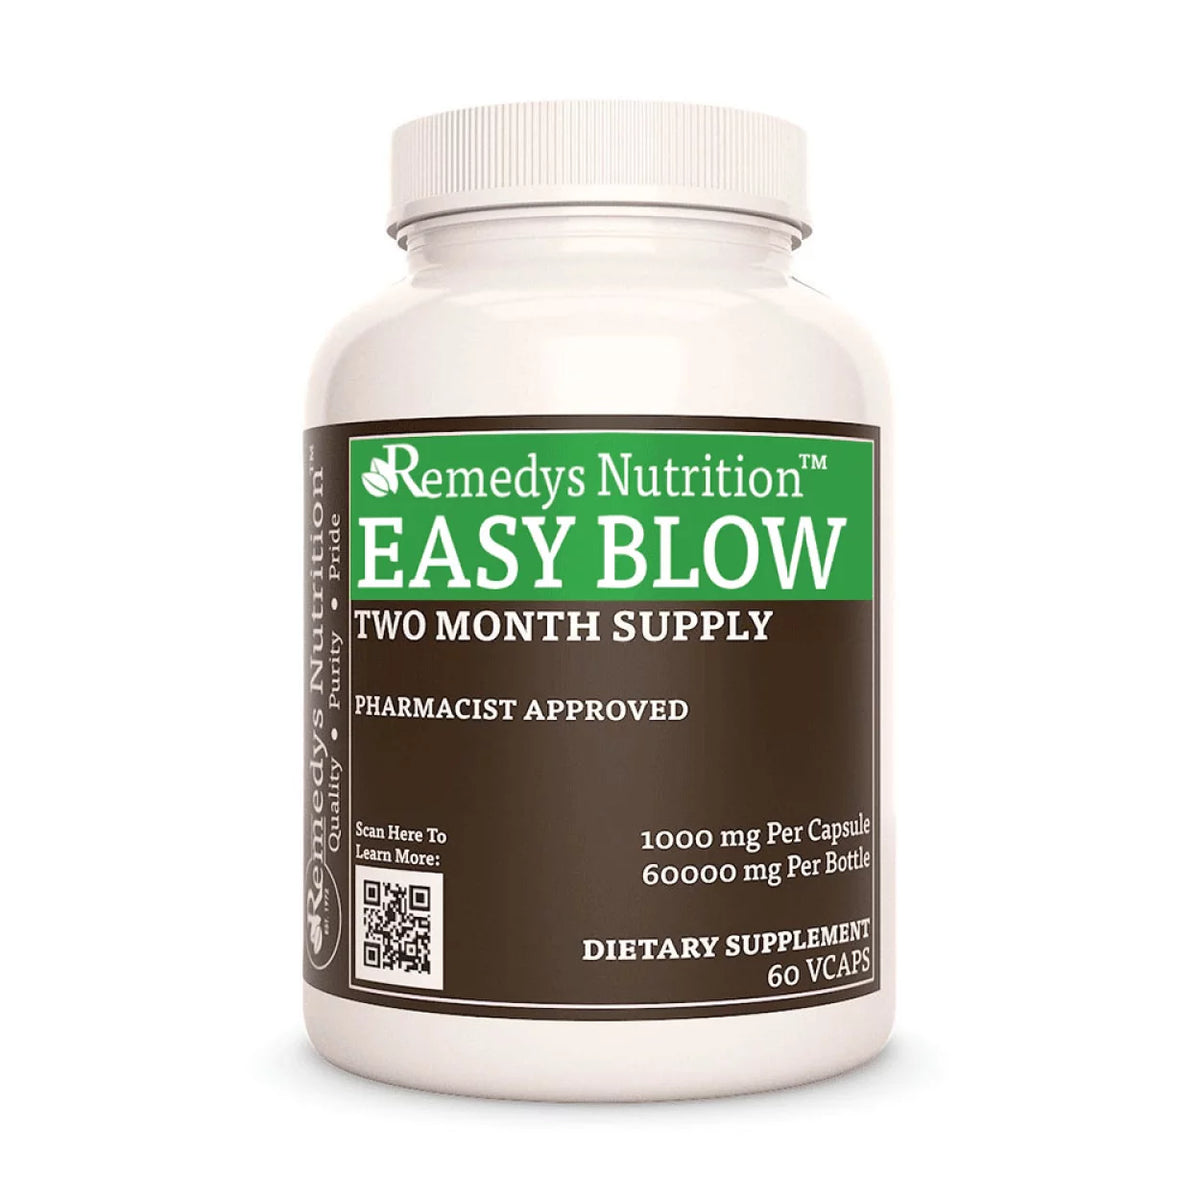 Image of Remedy's Nutrition® Easy Blow™ Capsules Dietary Herbal Supplement front bottle. Gentle Laxative, Made in the USA.